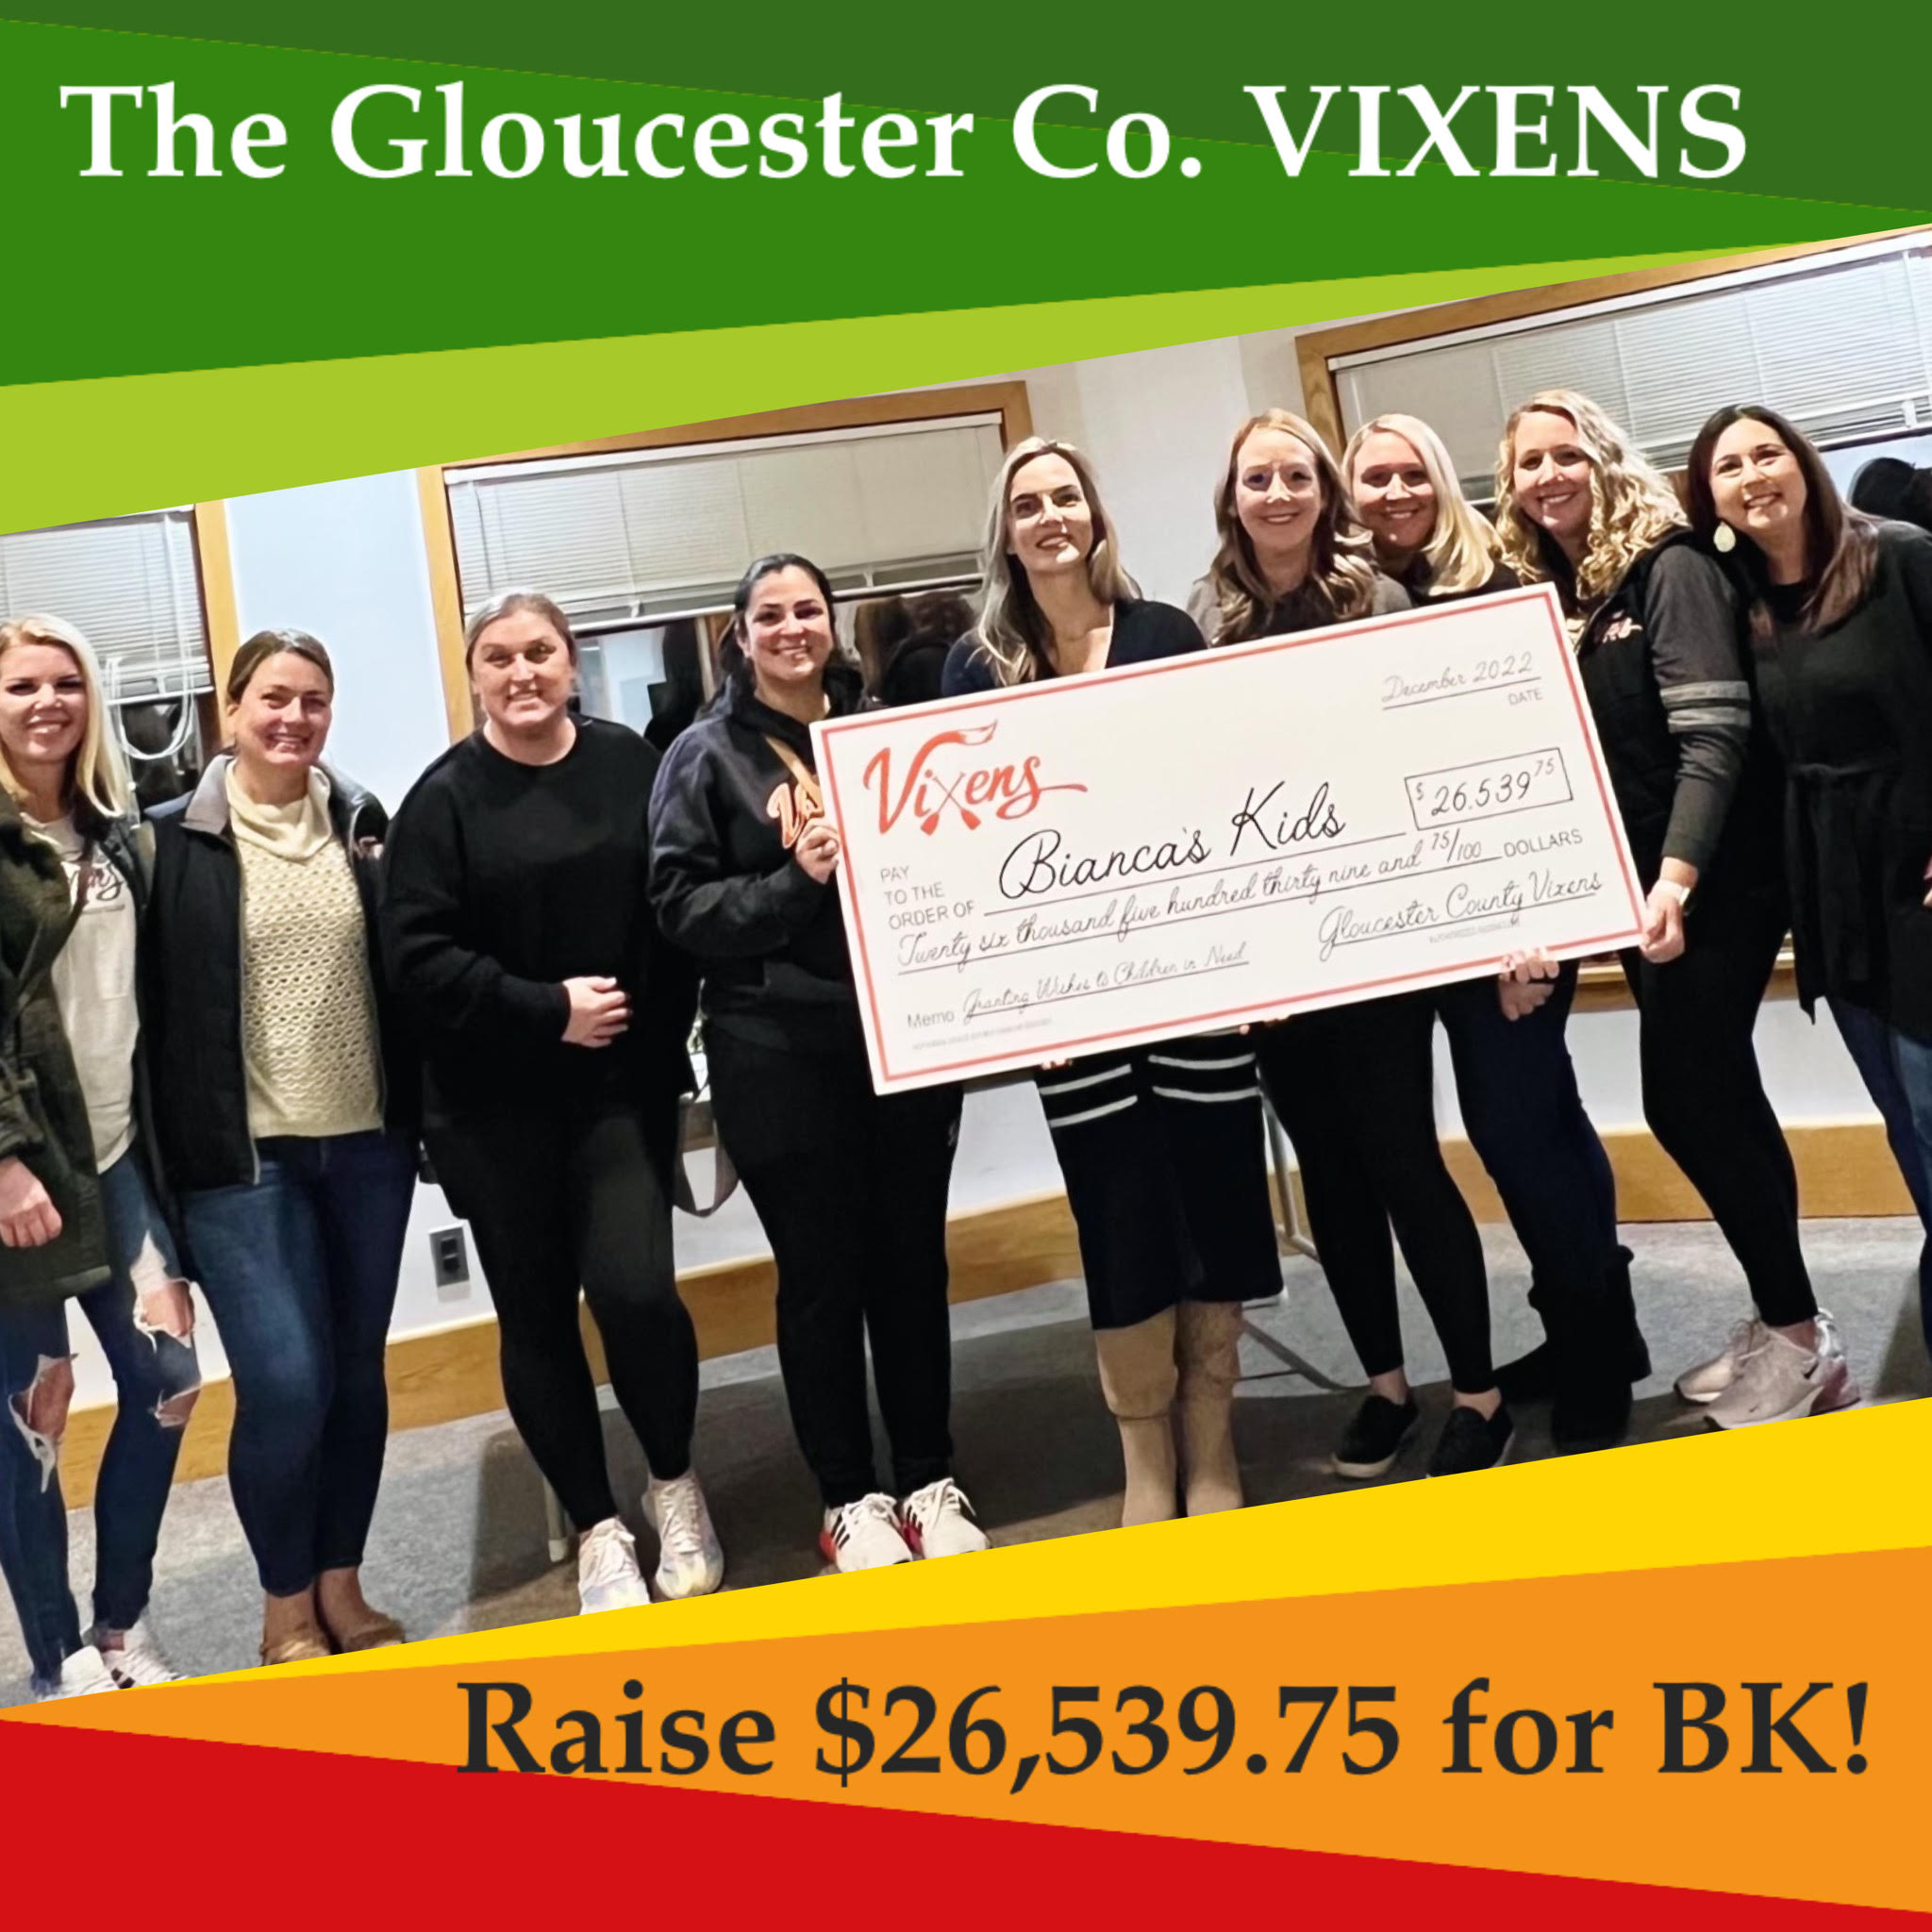 GLOUCESTER COUNTY VIXENS BLESS BIANCA’S KIDS WITH A MASSIVE DONATION!